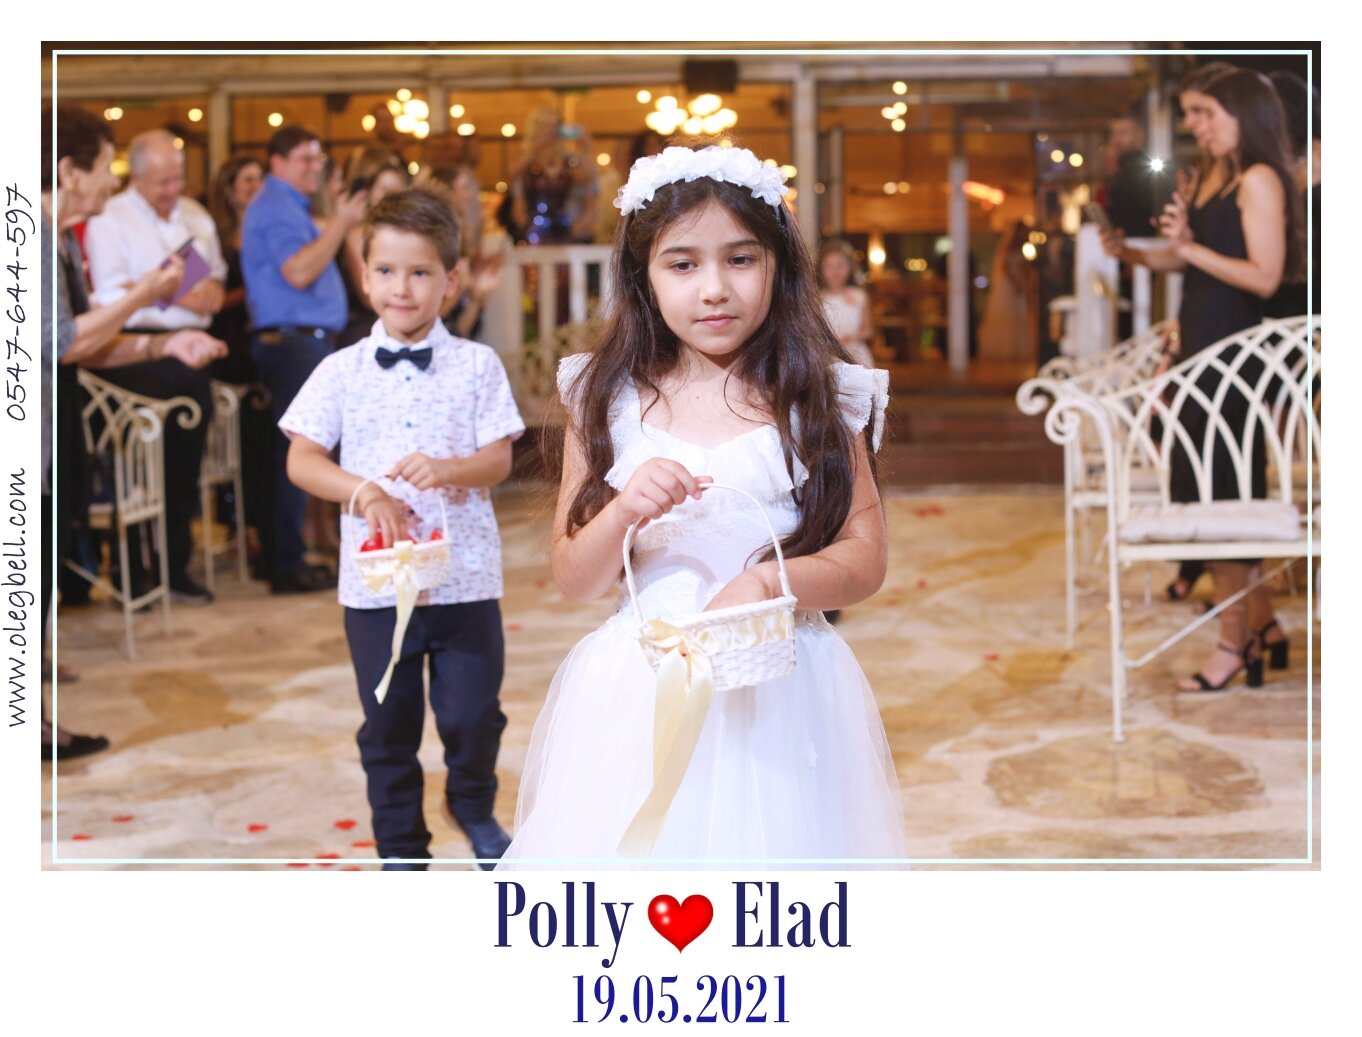 POLLY_AND_ELAD_WD_MG_SITE_018.JPG